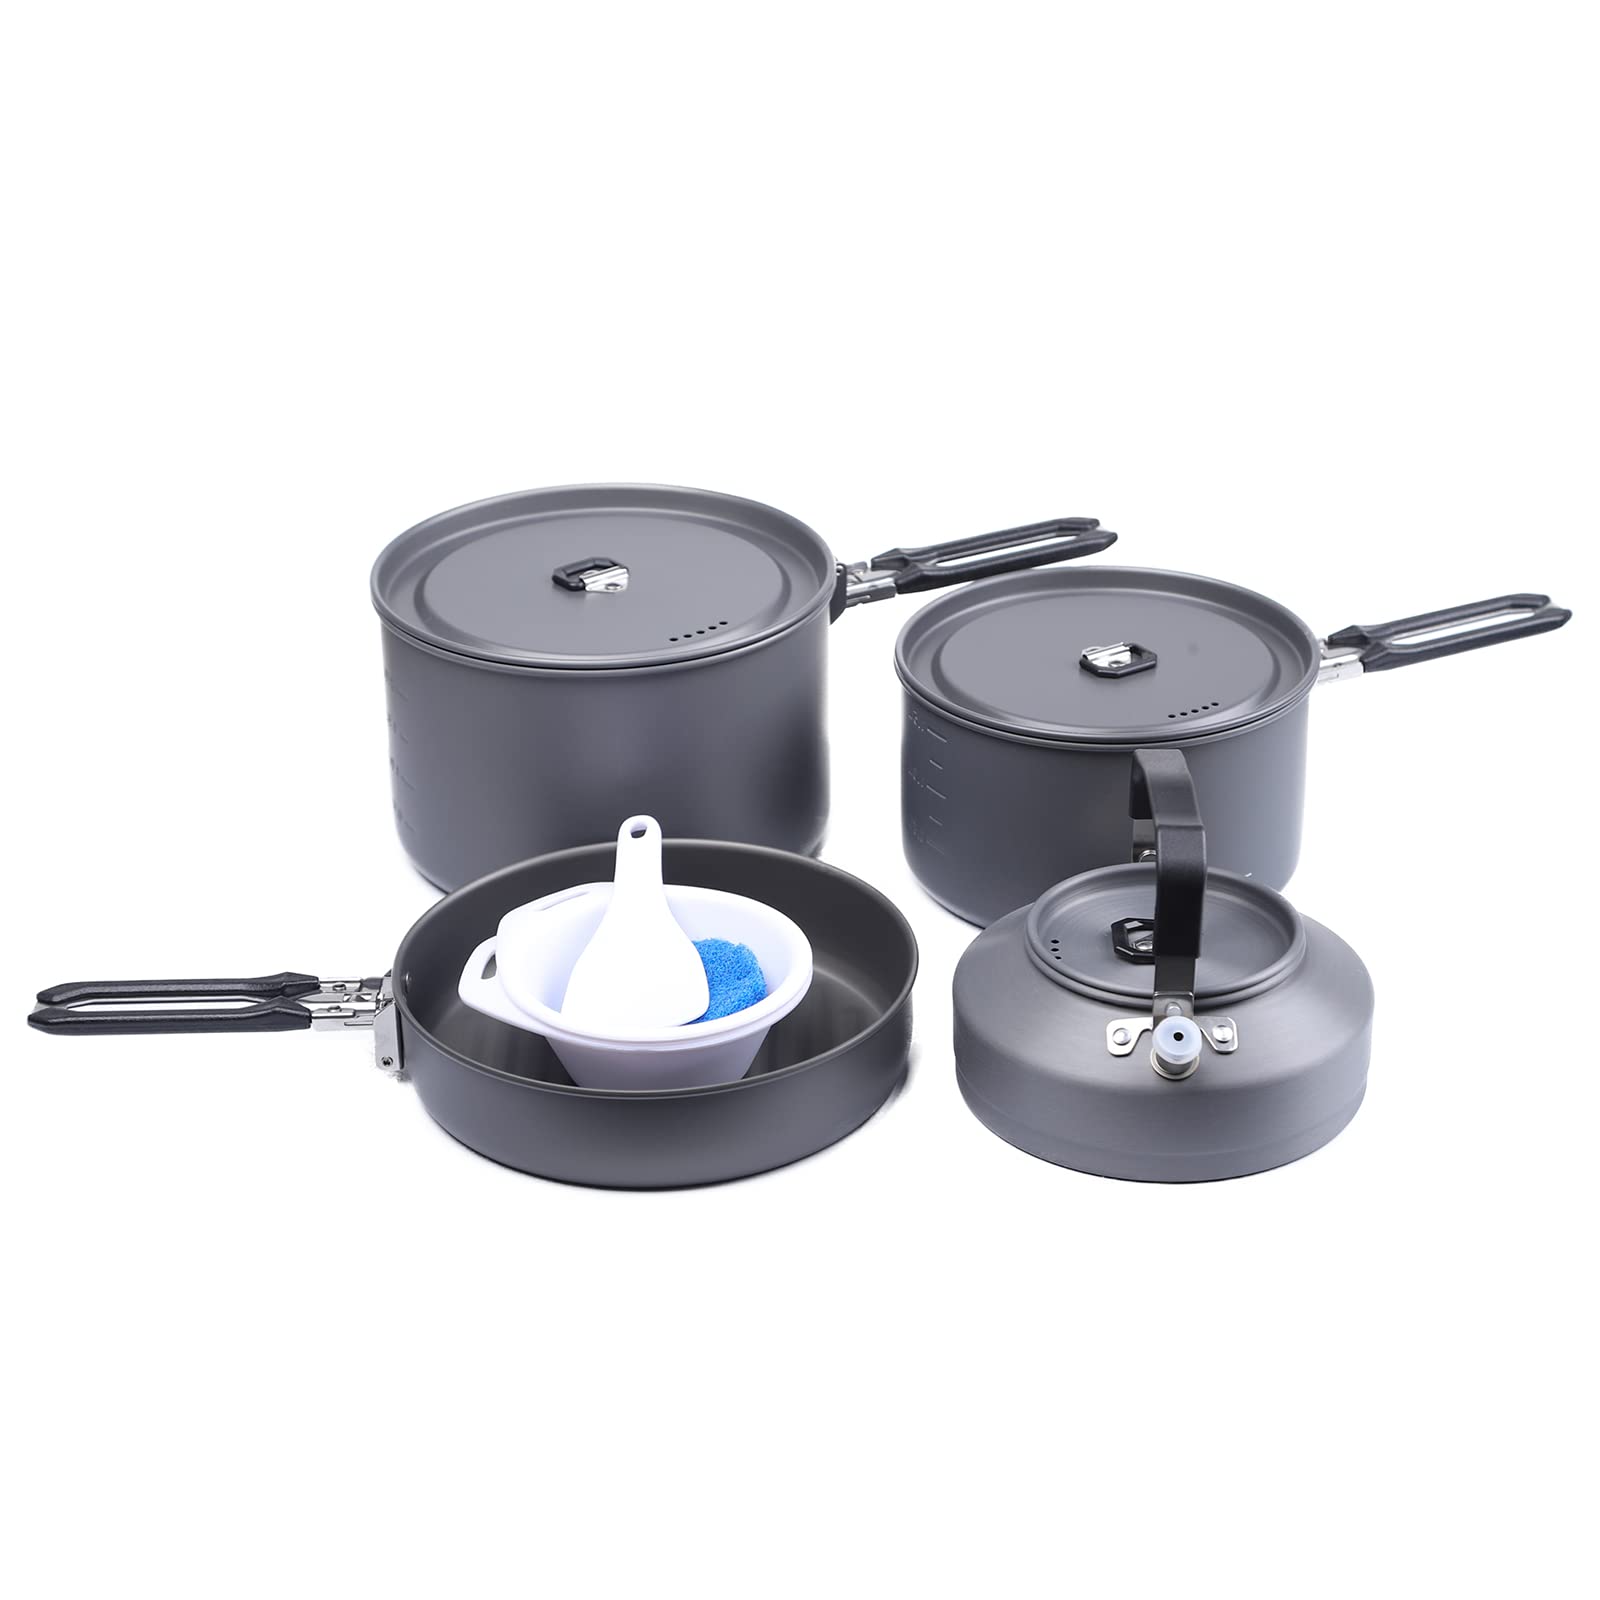 Fire-Maple Feast 4 Camping Cookware Kit Outdoor Cookware Set with Pots Kettle Saucepans and Spatula for Hiking Fishing Picn